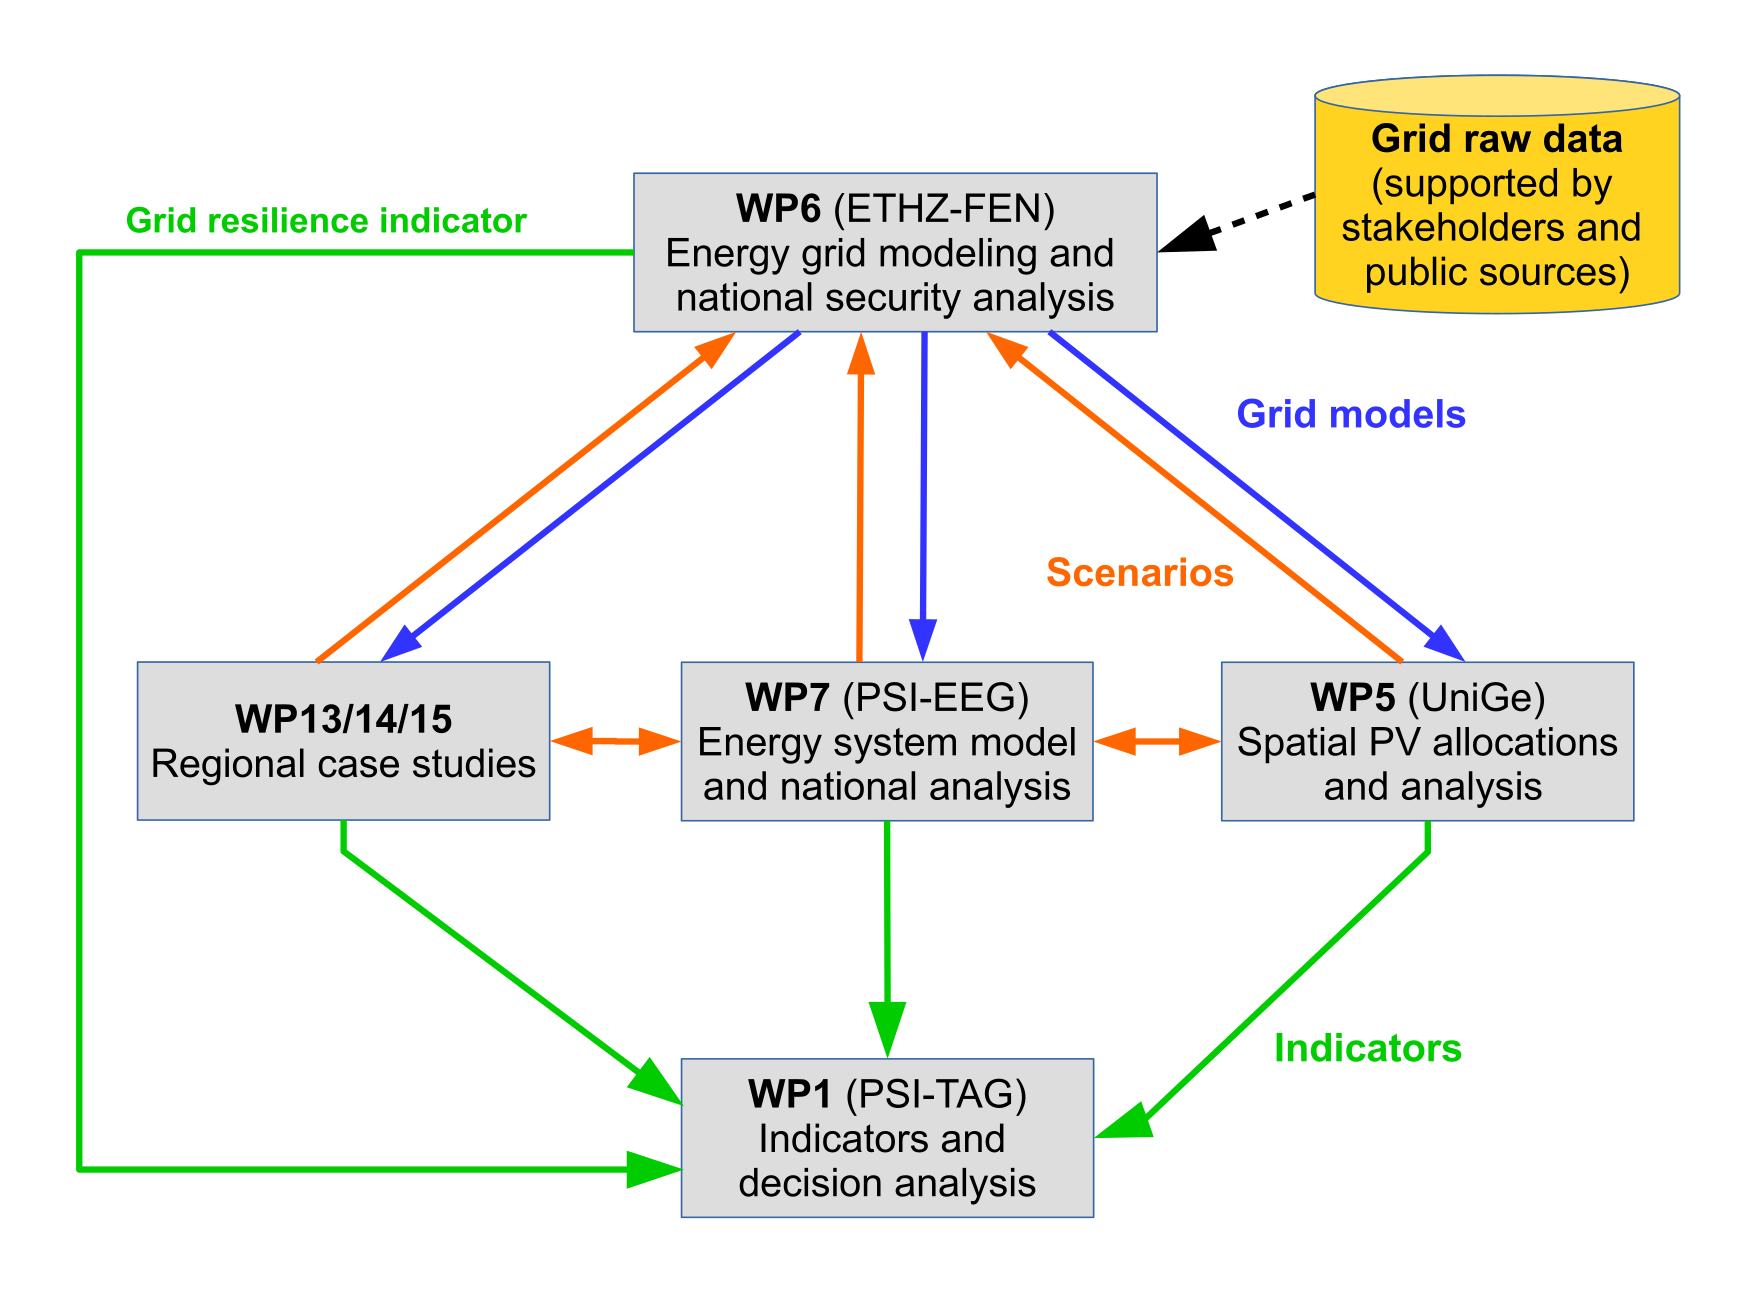 Figure: Interactions between WP6 and the other WPs